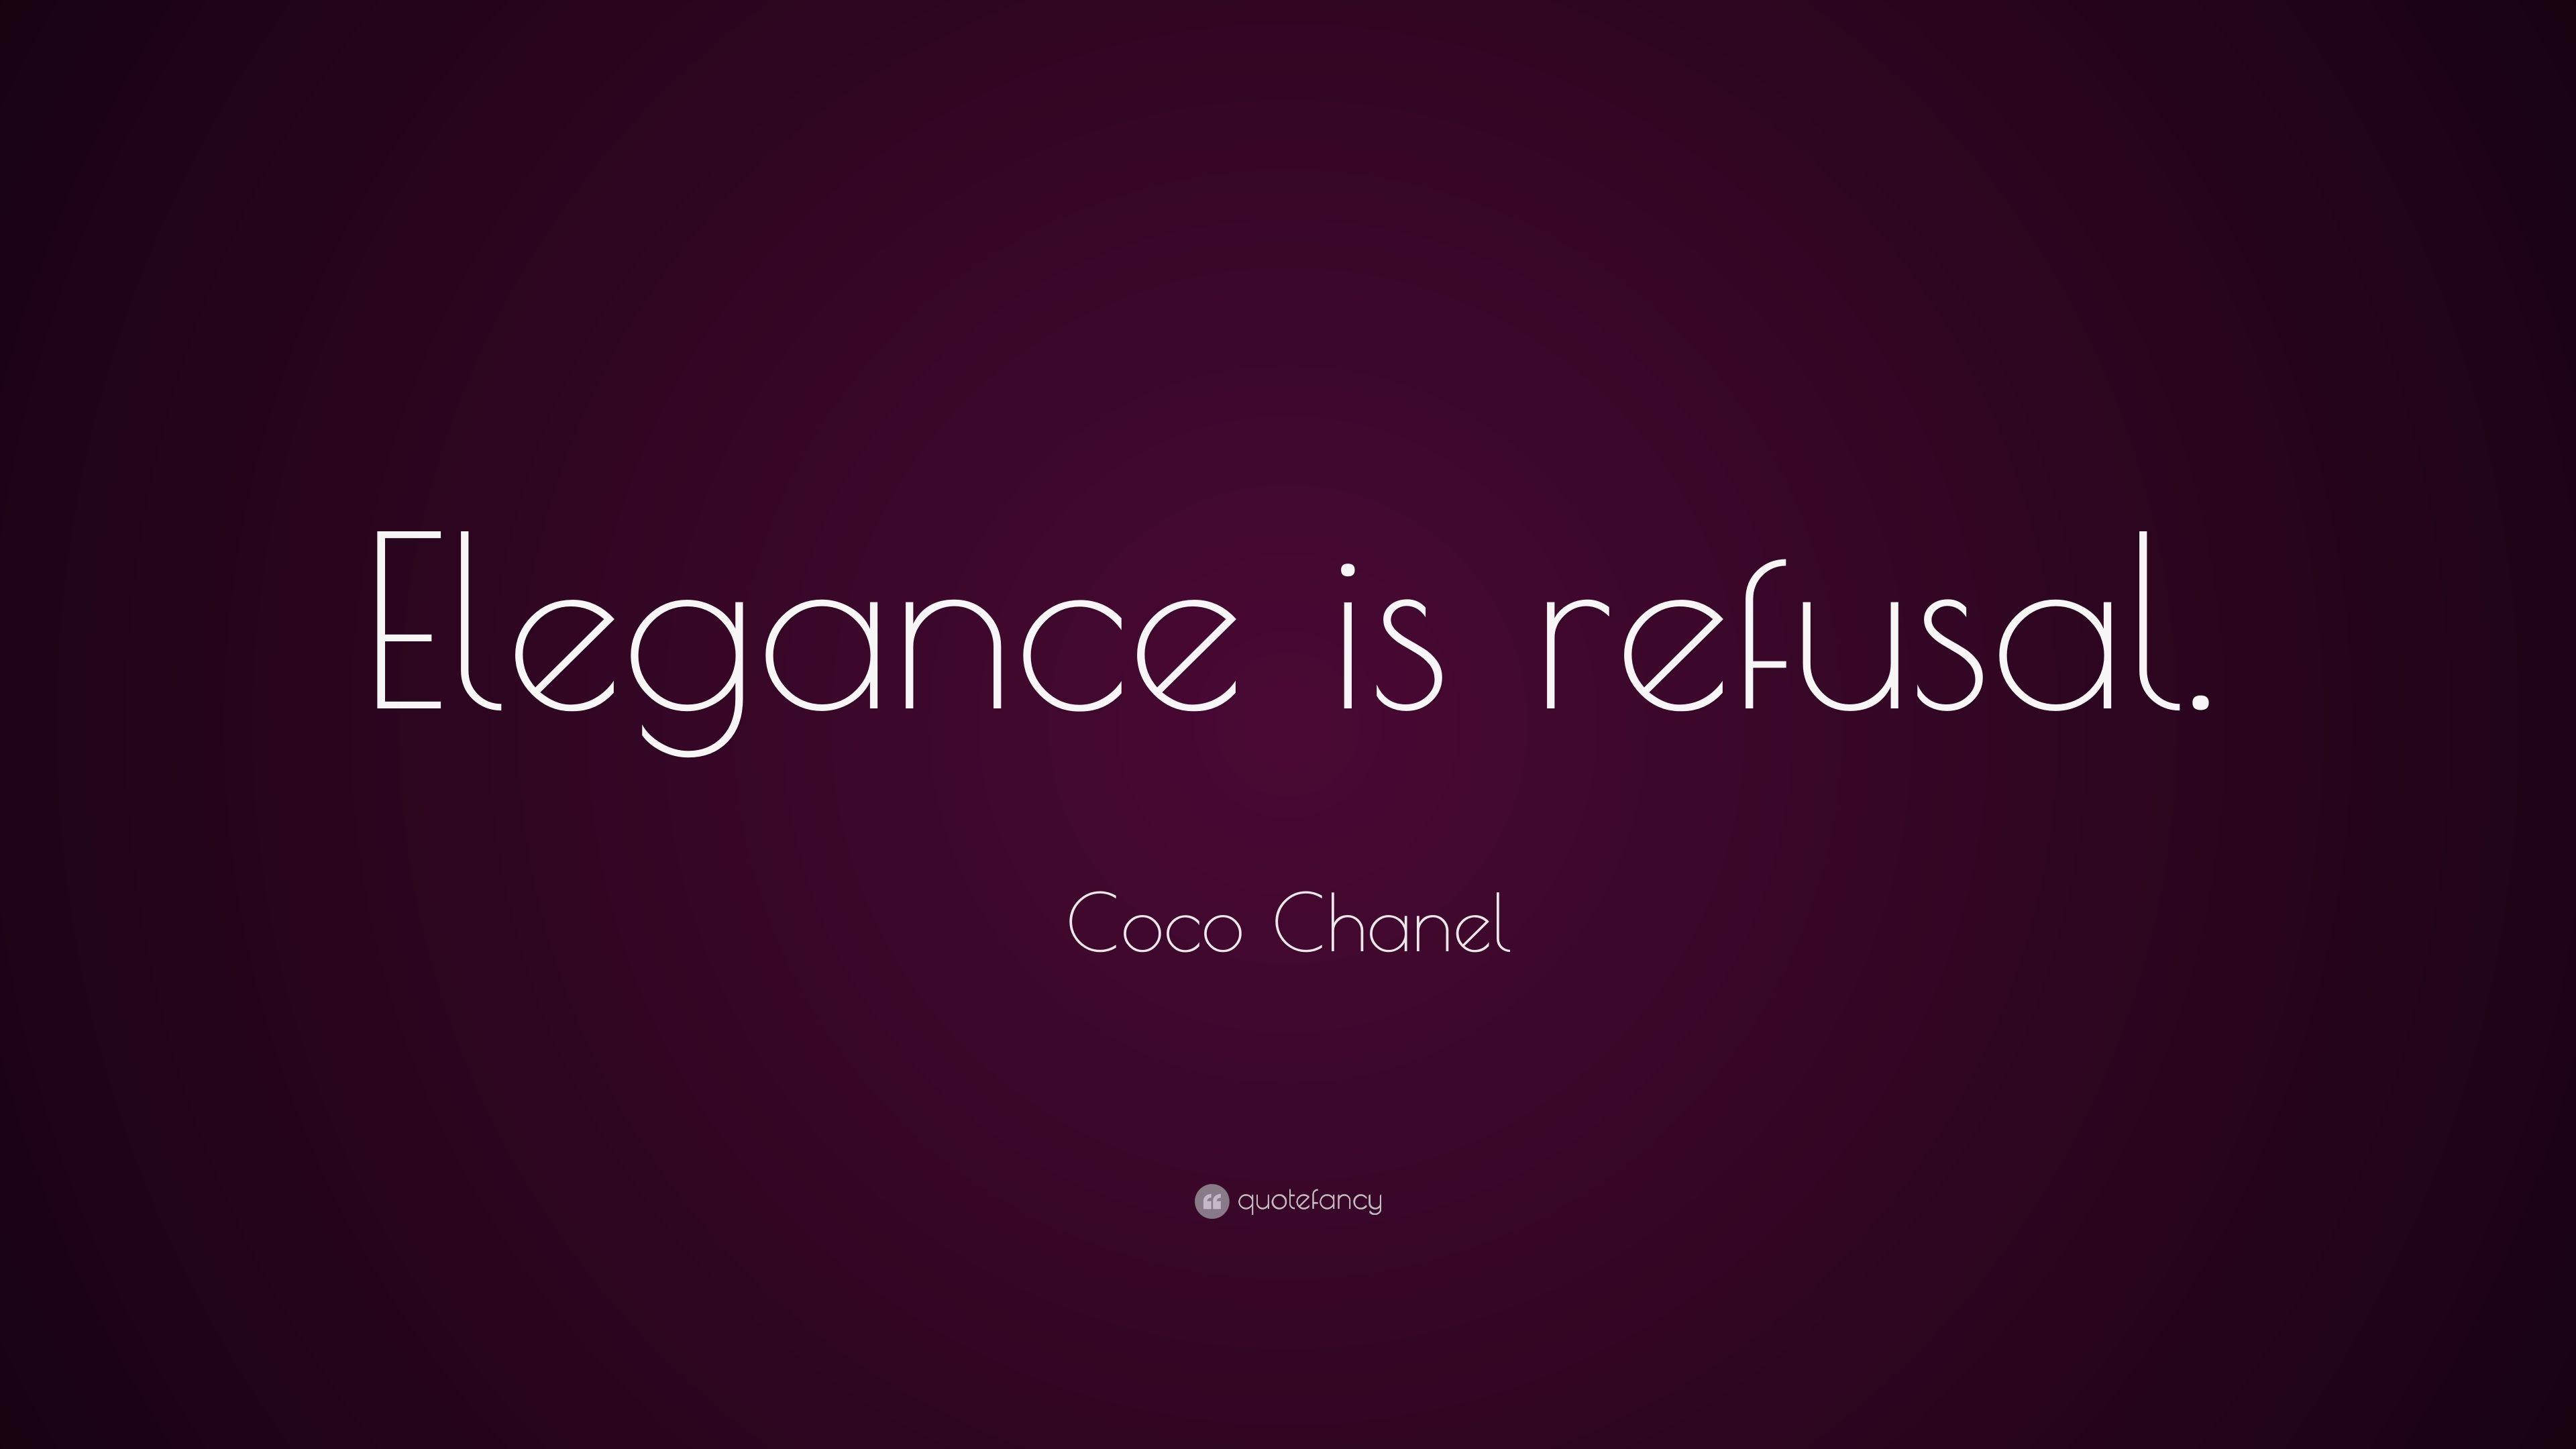 Coco Chanel Quote: “Elegance is refusal.” (13 wallpaper)